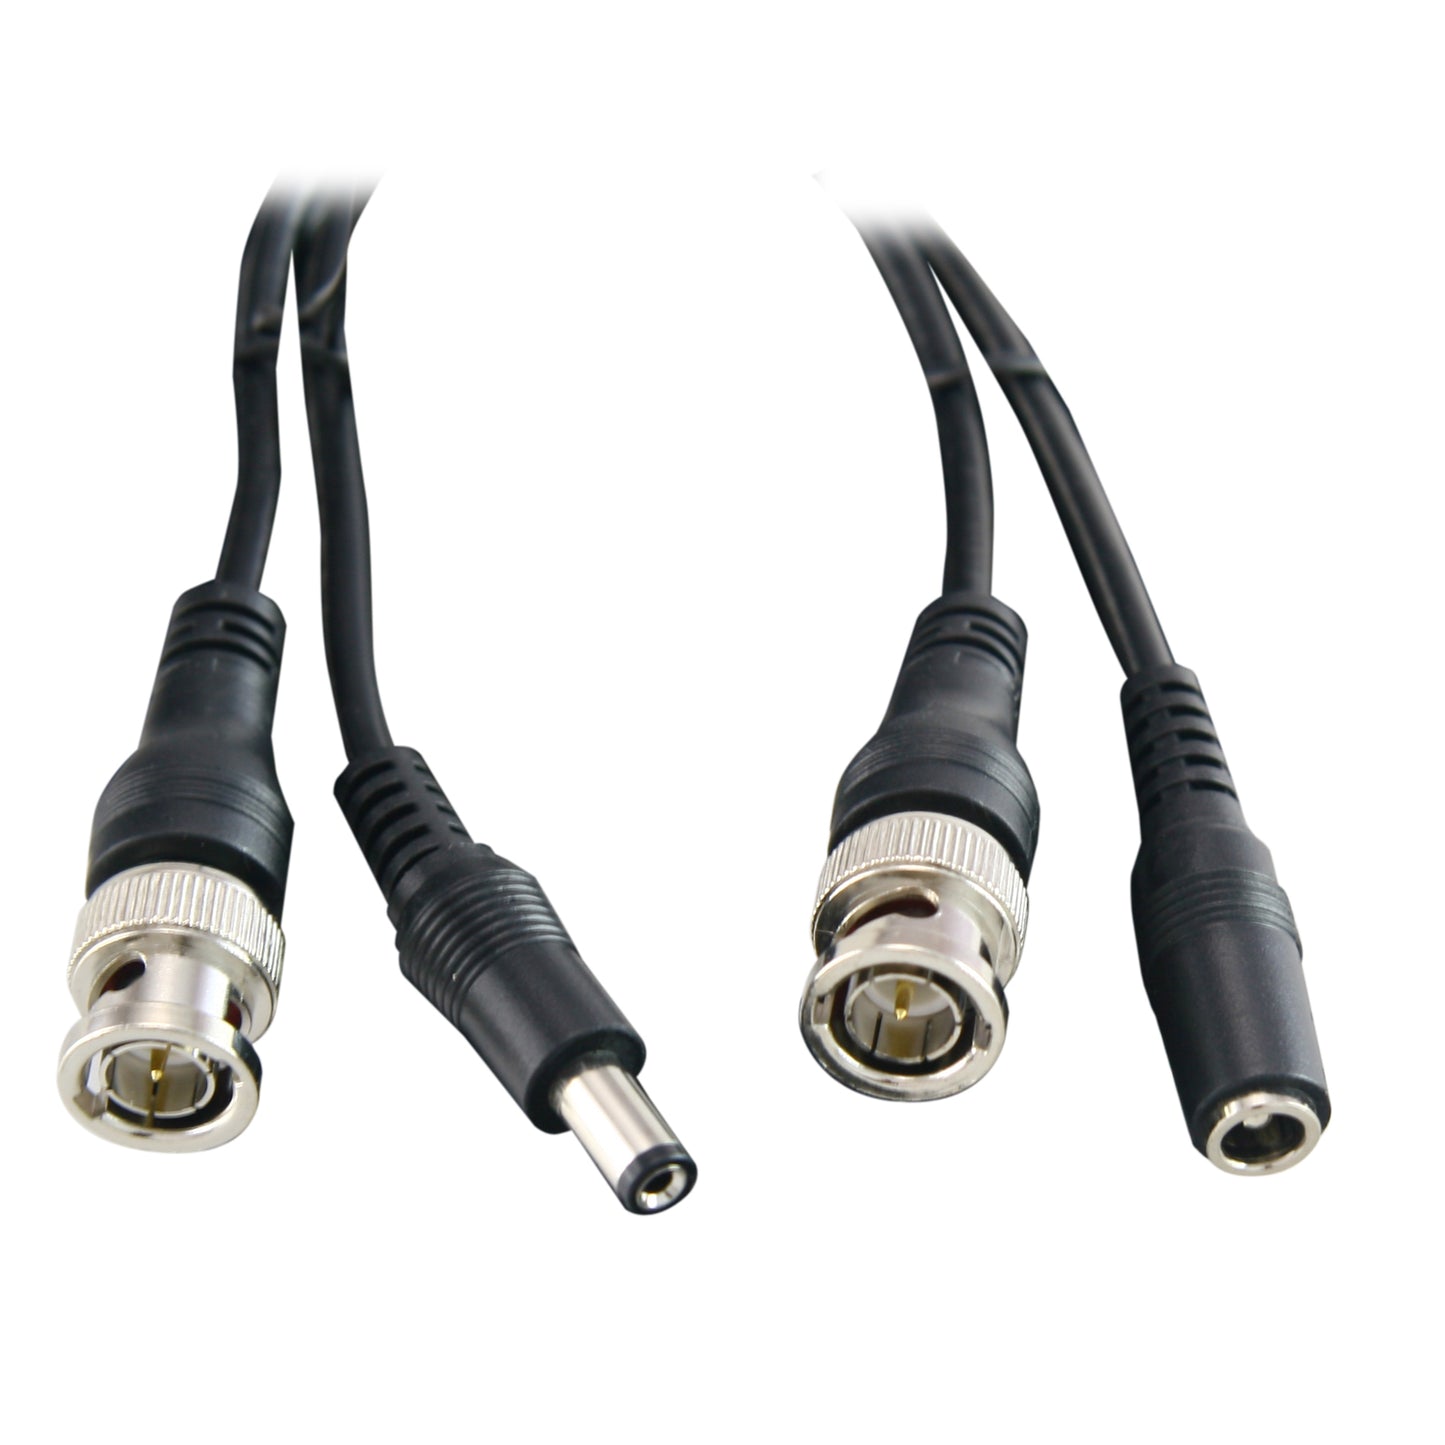 Combined cable RG59 + DC - BNC connector - 40 meters - Video - Power - Low losses